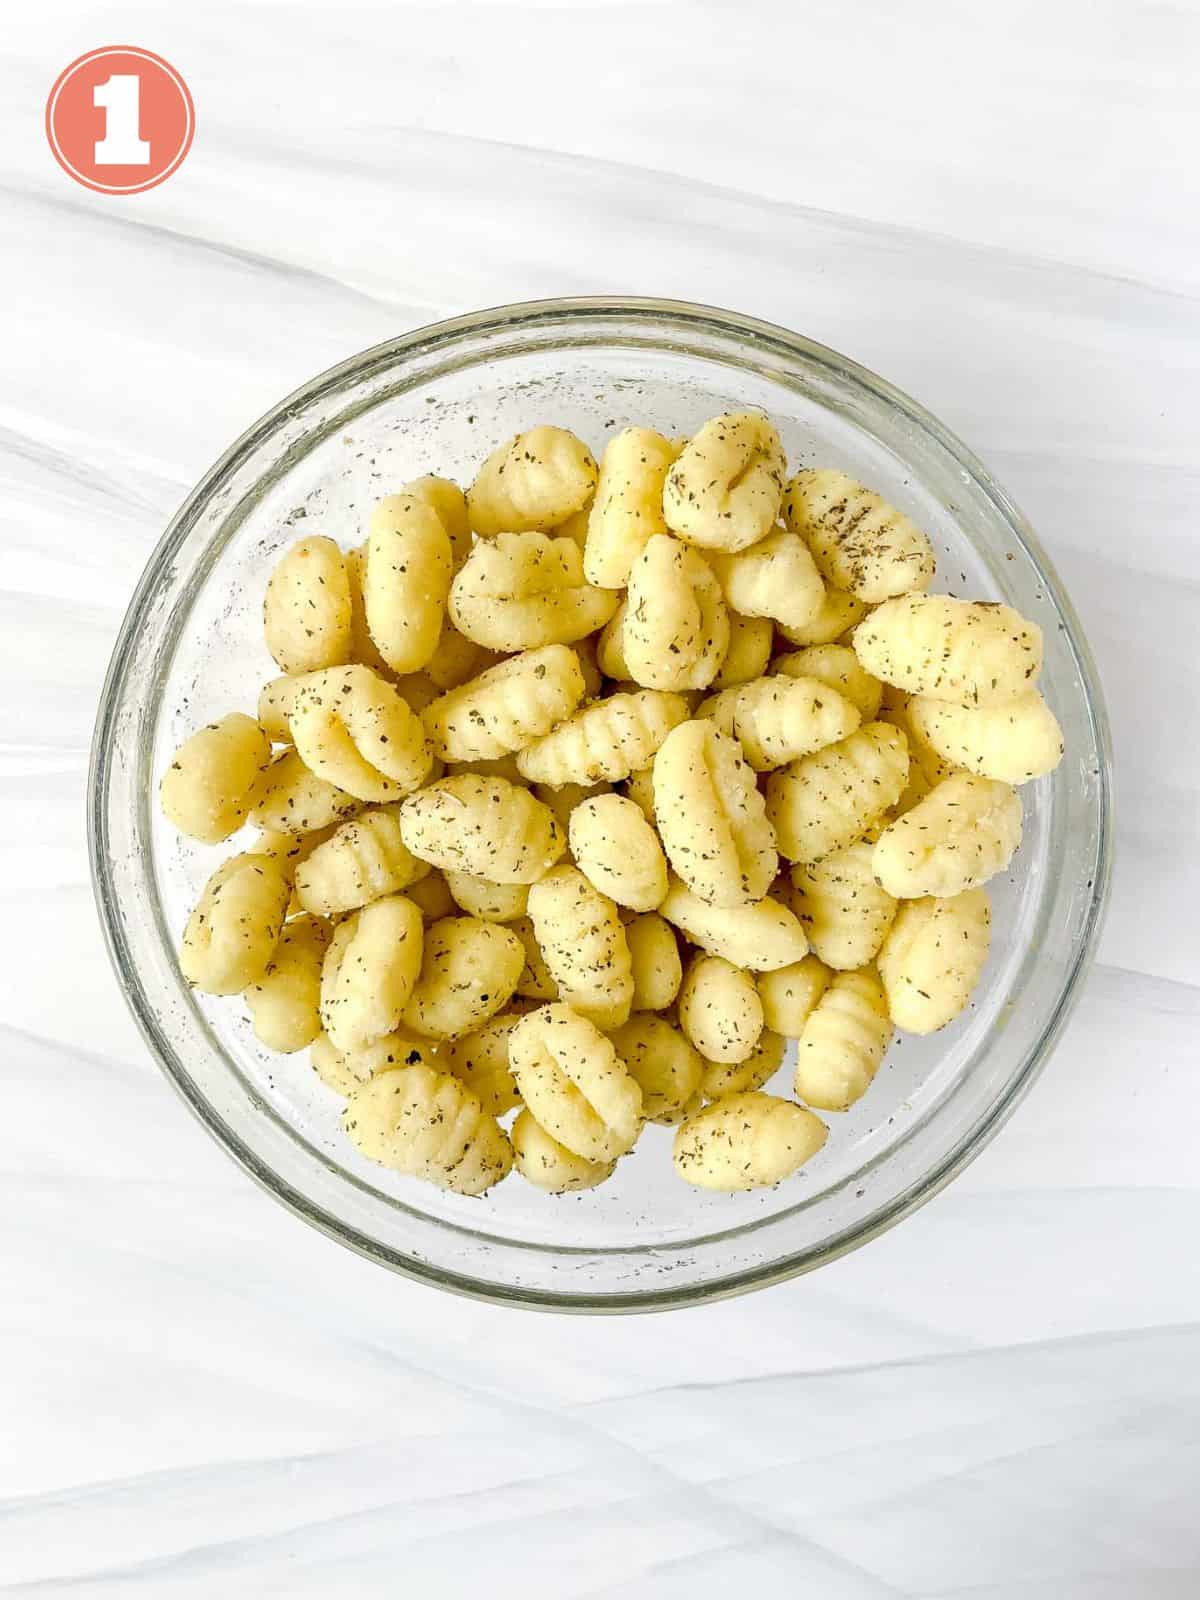 gnocchi coated in herbs in a glass bowl labelled number one.